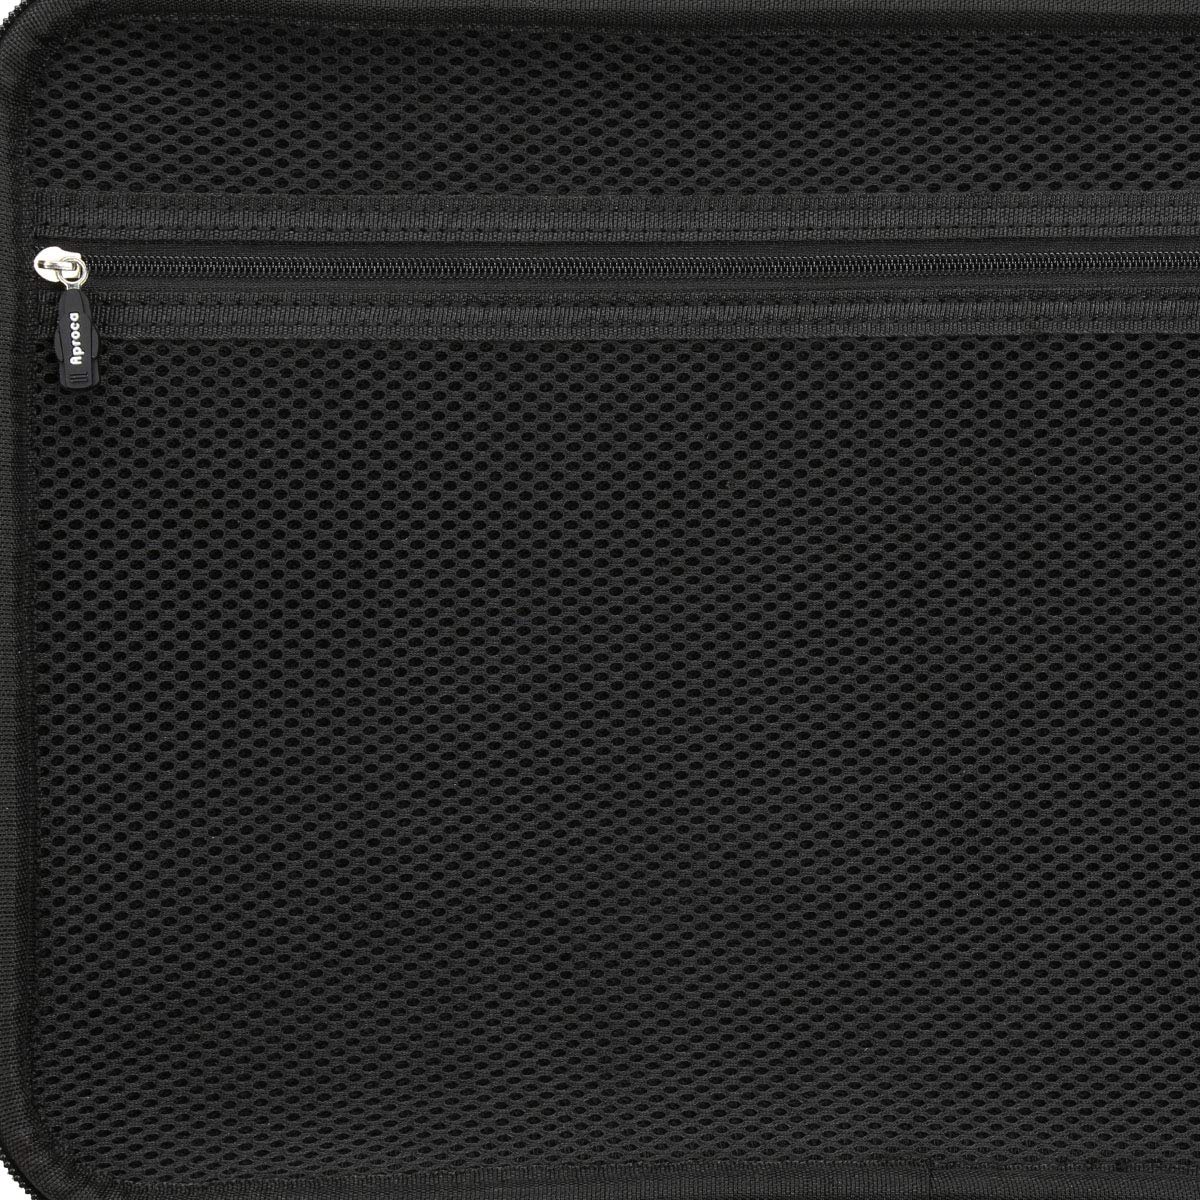 Aproca Hard Travel Storage Carrying Case, for Epson VS250 SVGA 3LCD Projector